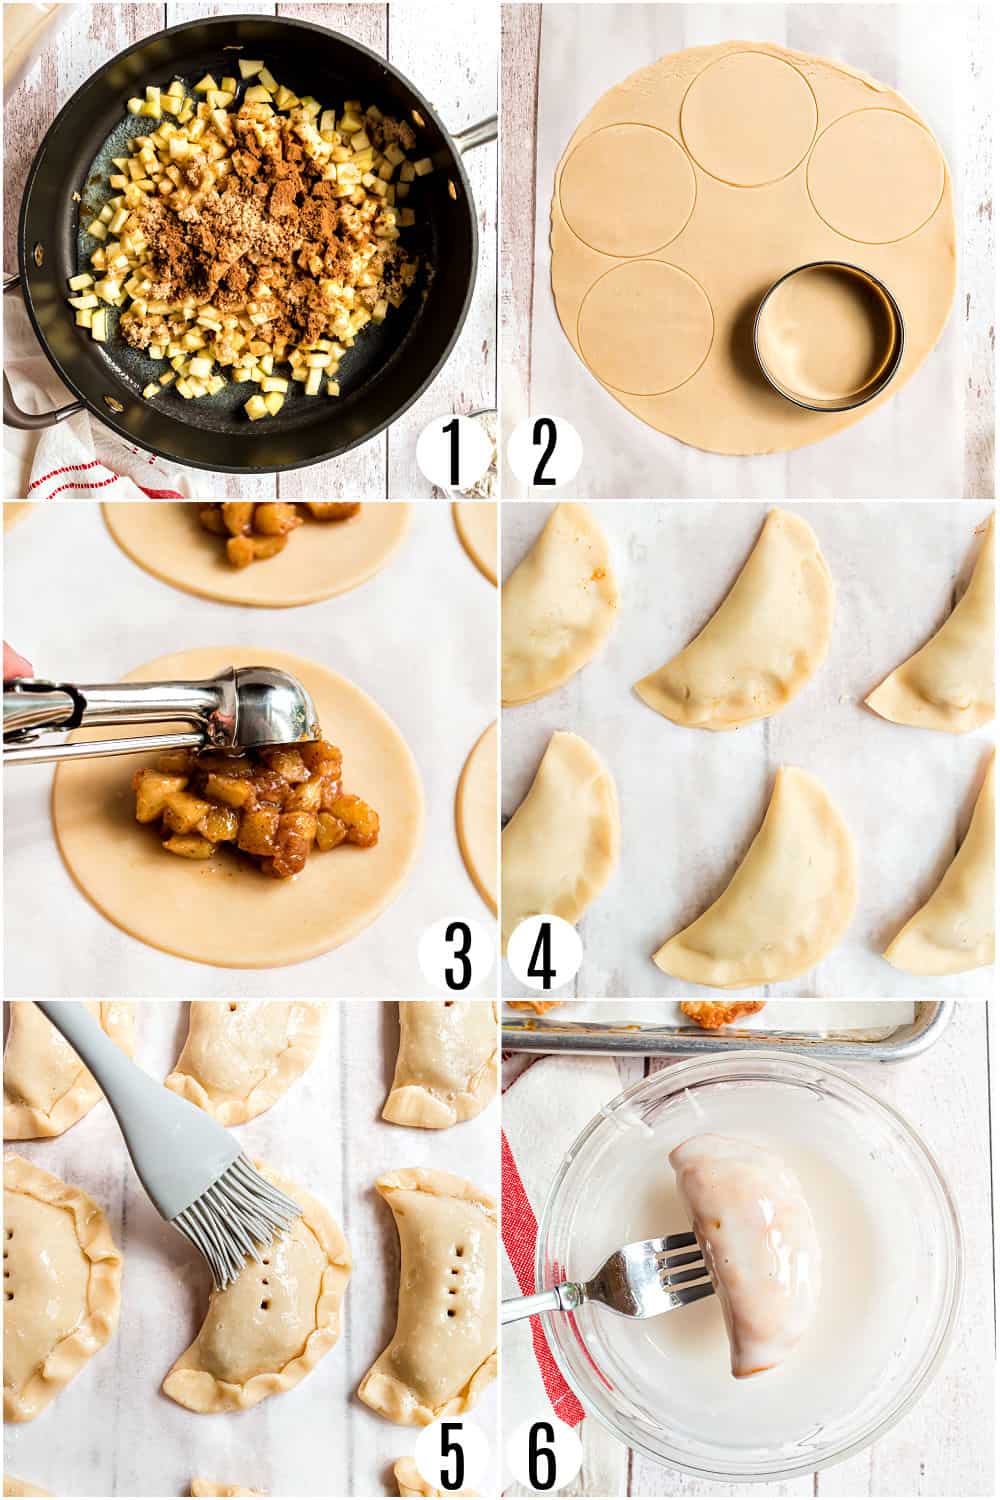 Step by step photos showing how to make apple hand pies.